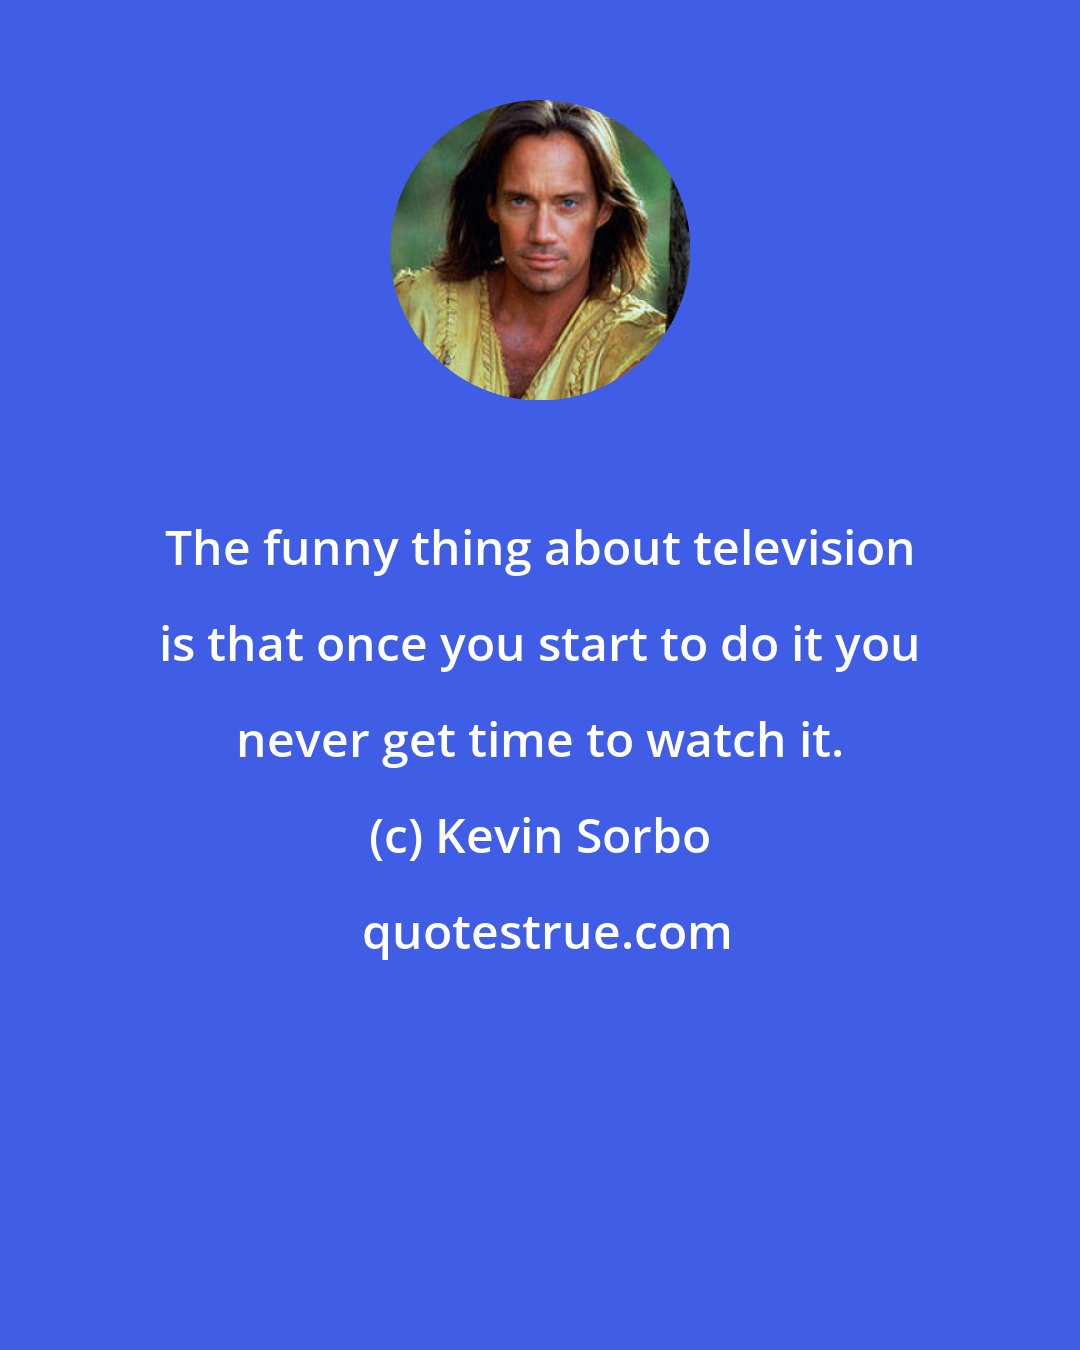 Kevin Sorbo: The funny thing about television is that once you start to do it you never get time to watch it.